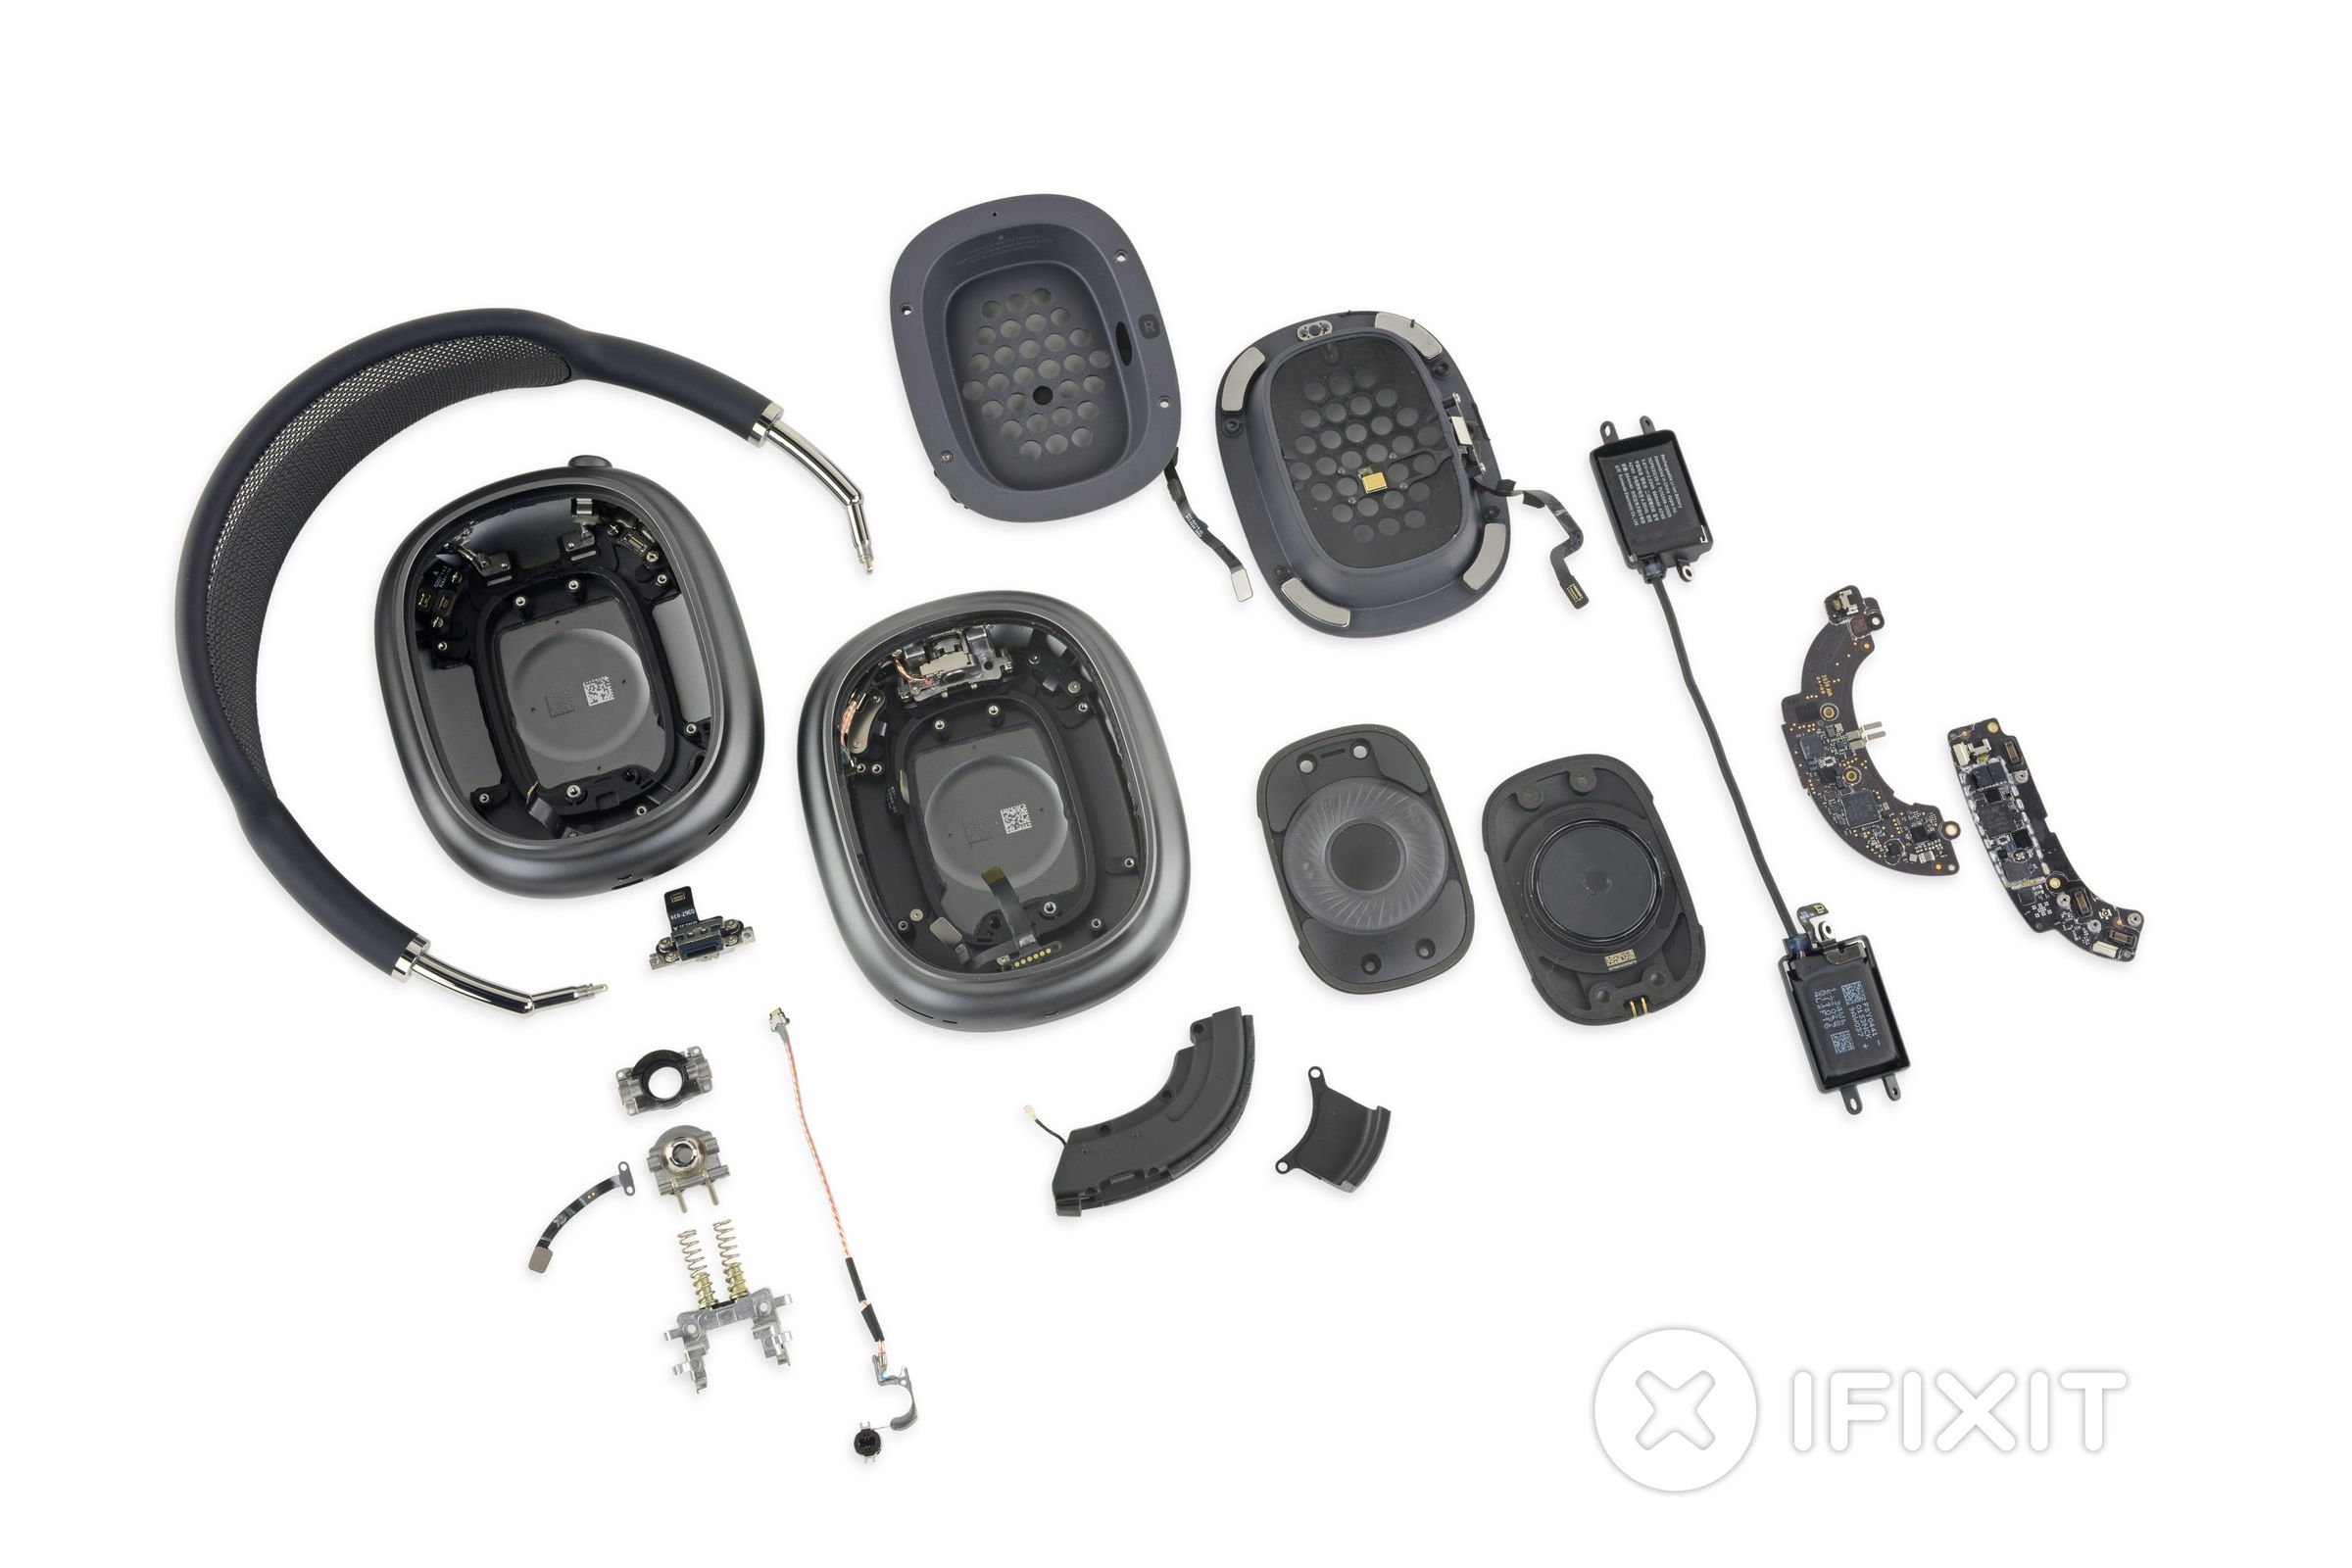 iFixit praises Apple’s use of screws to attach key components.